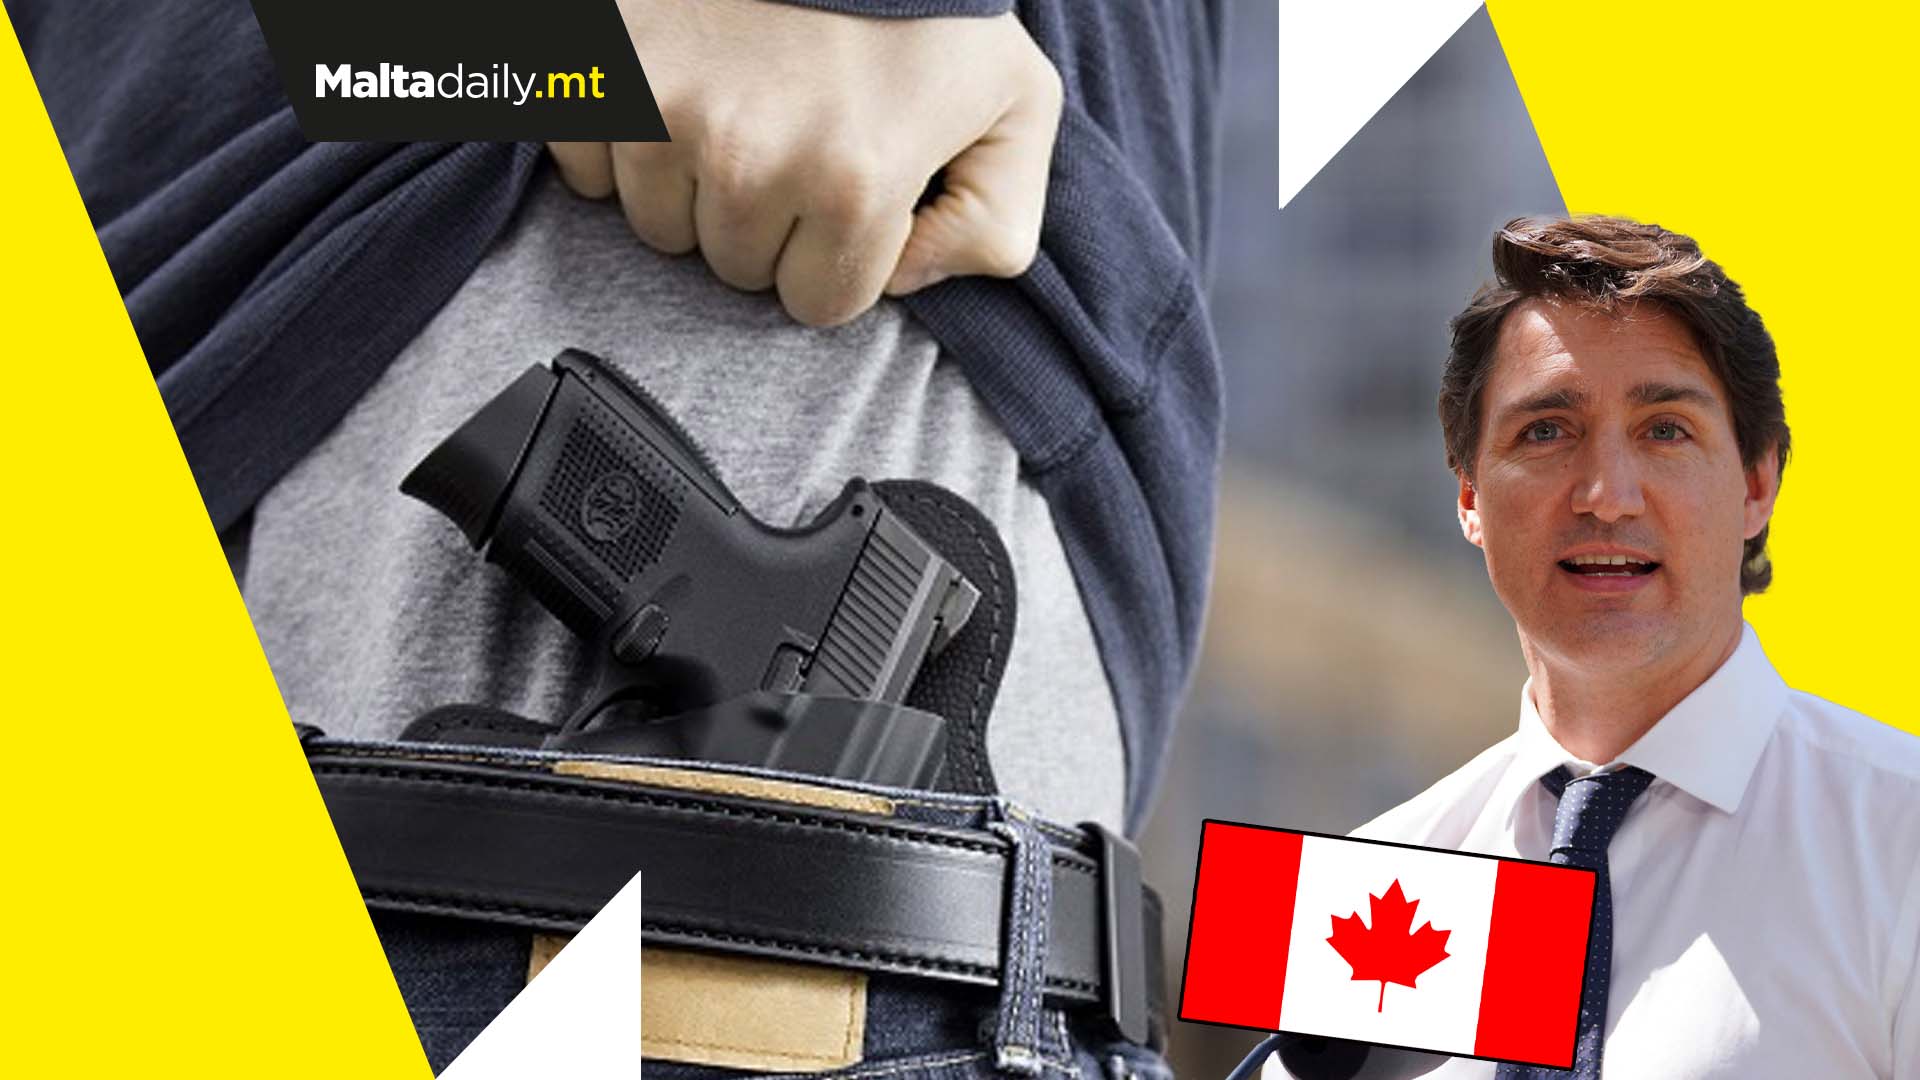 Only shooting athletes and hunters will be allowed guns in Canada